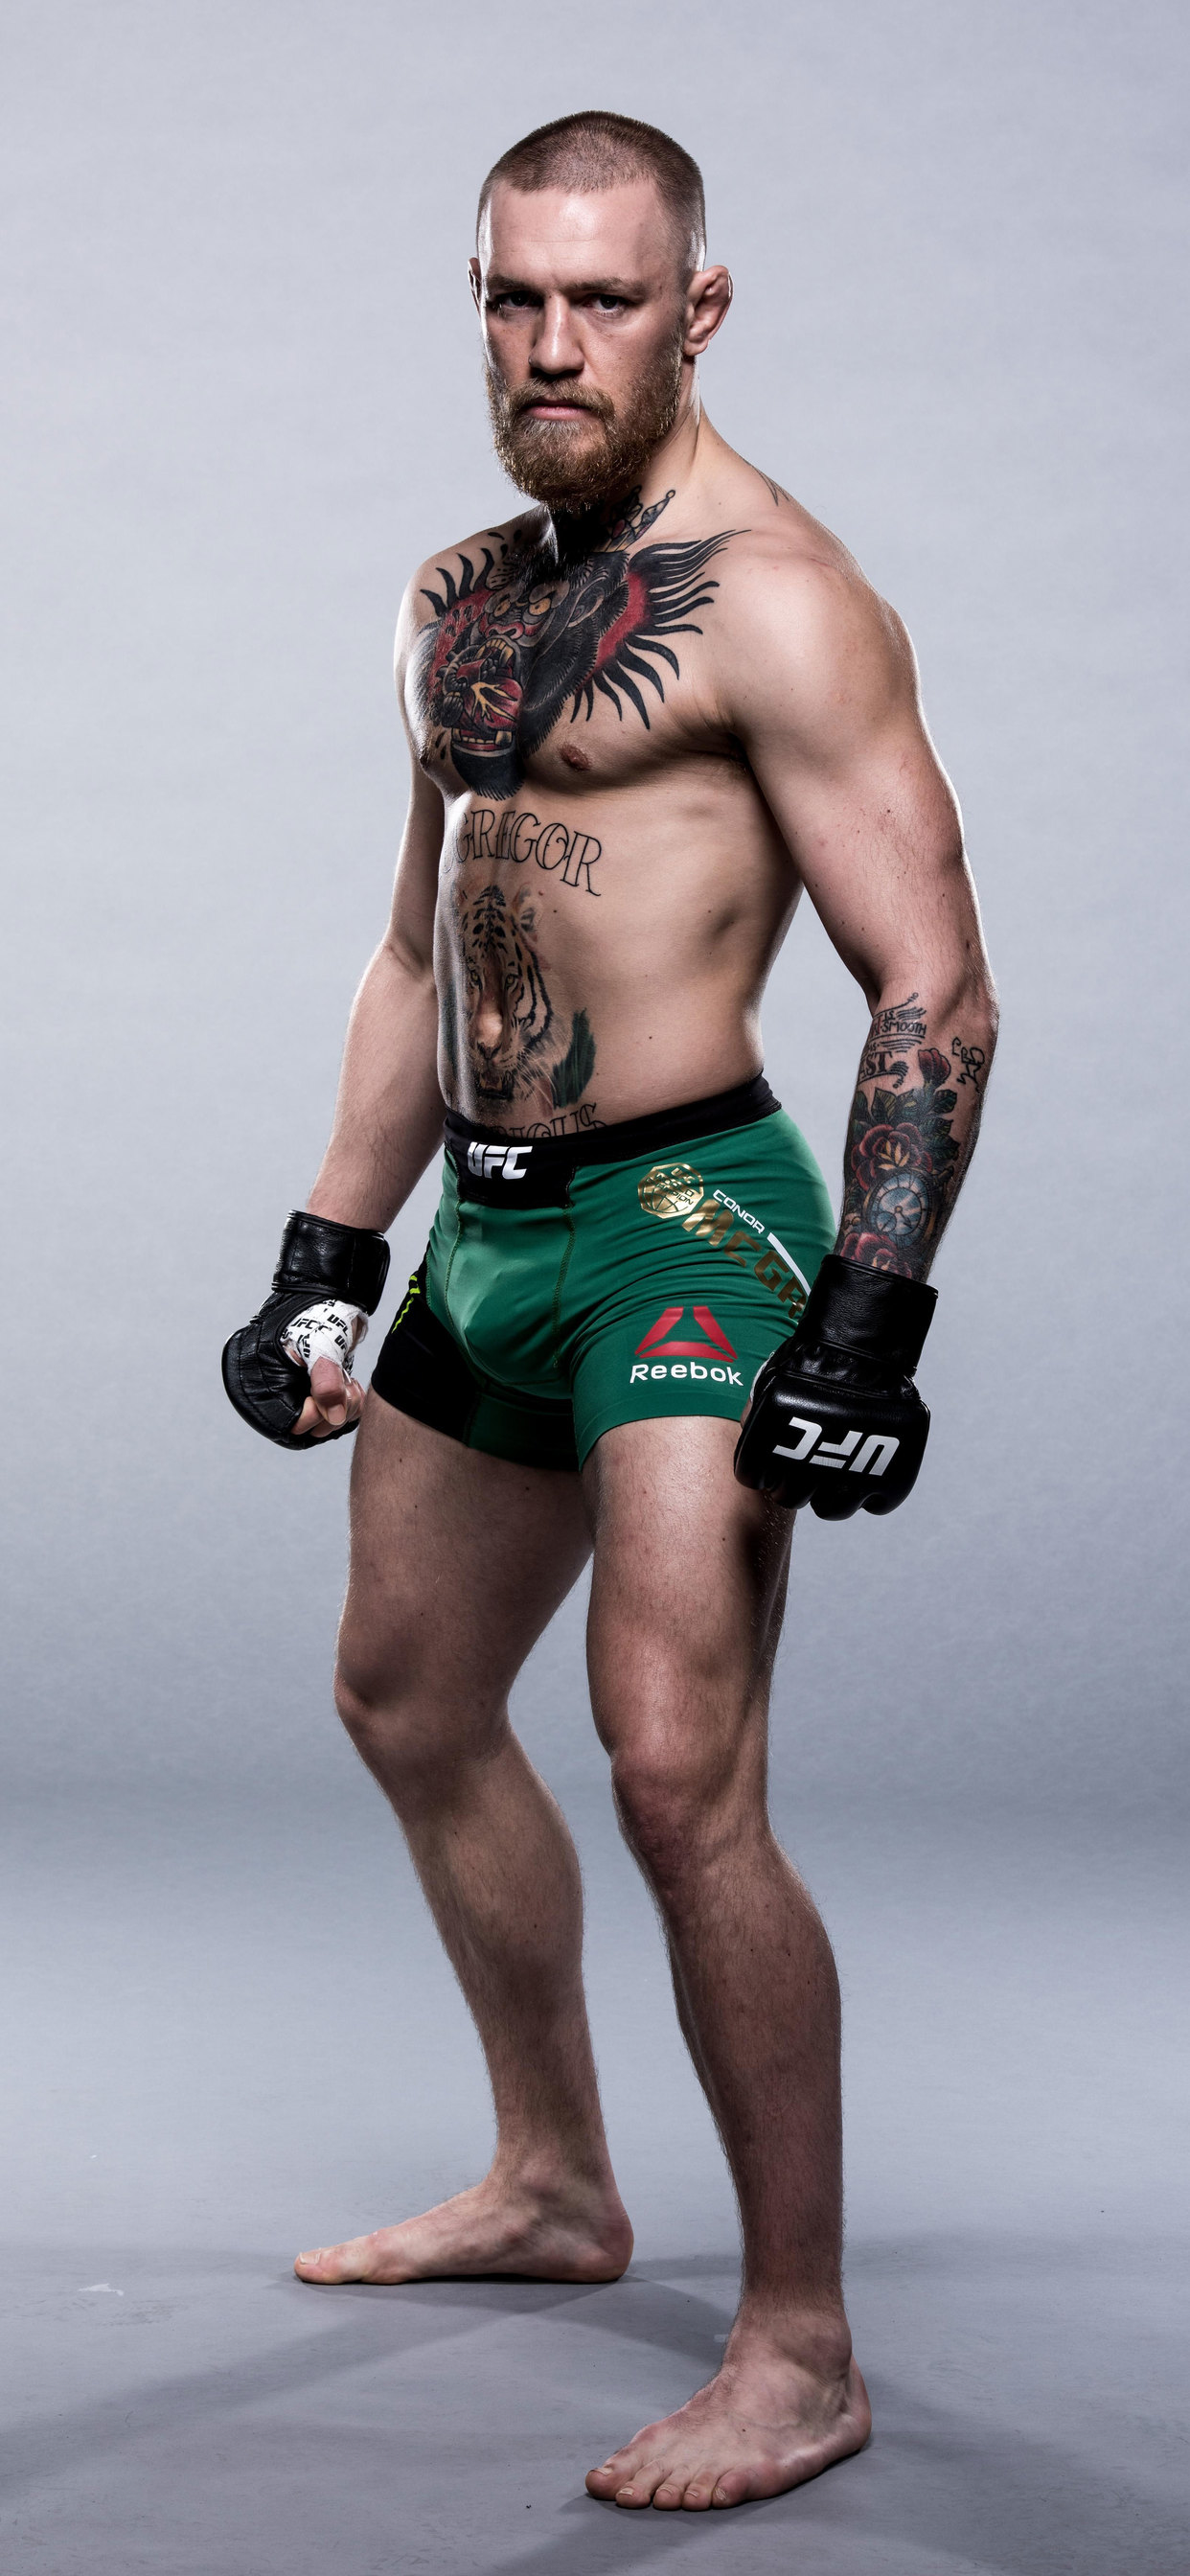 conor mcgregor wallpaper,barechested,muscle,shorts,arm,chest